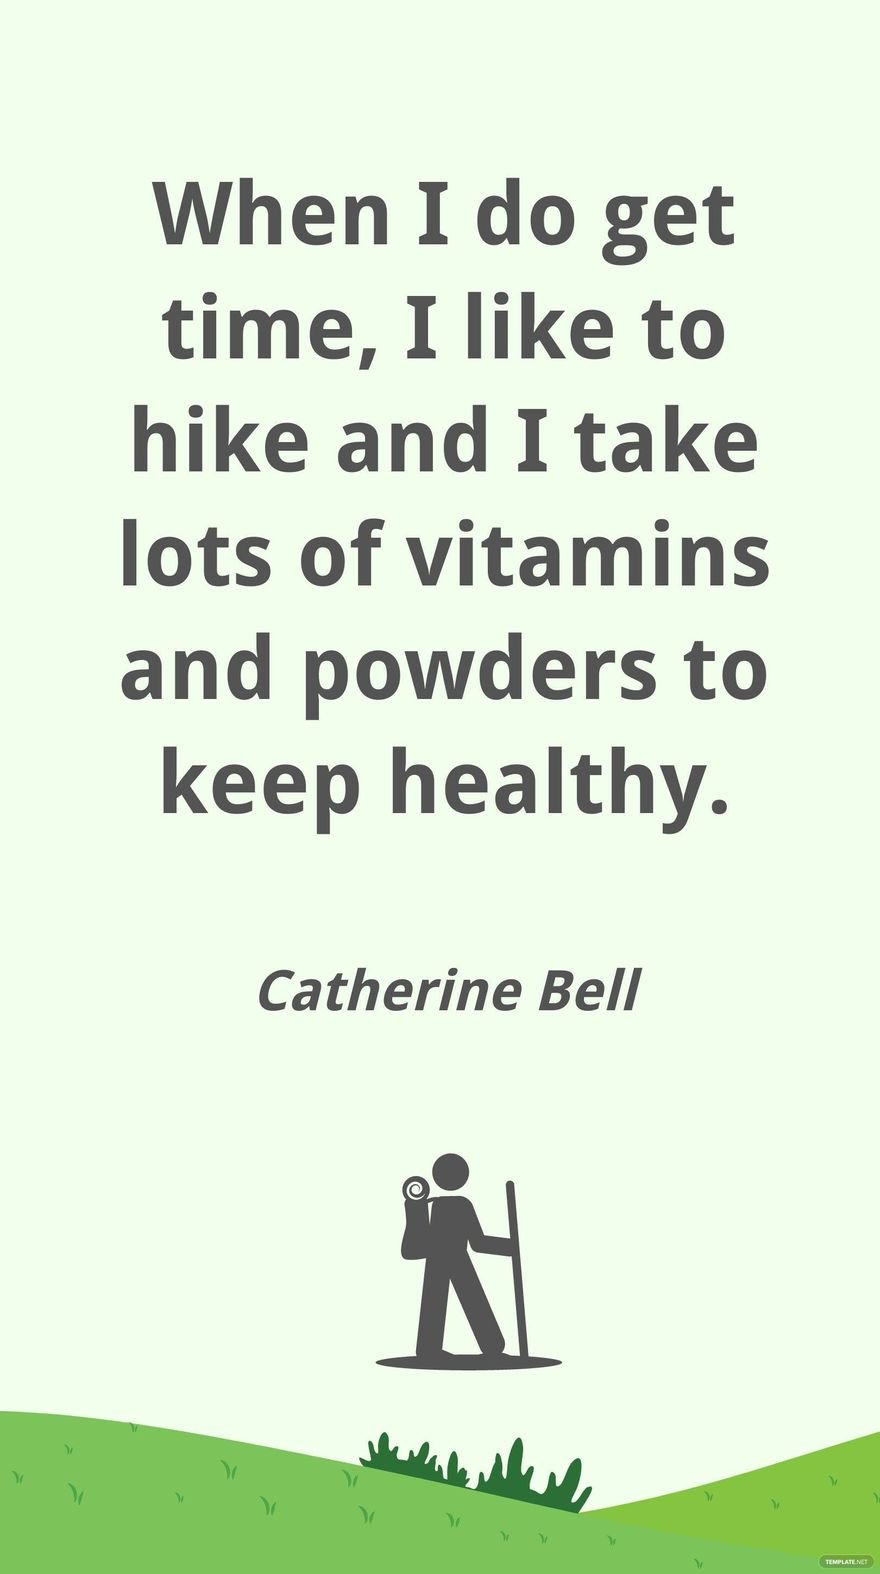 Free Catherine Bell - When I do get time, I like to hike and I take lots of vitamins and powders to keep healthy. in JPG